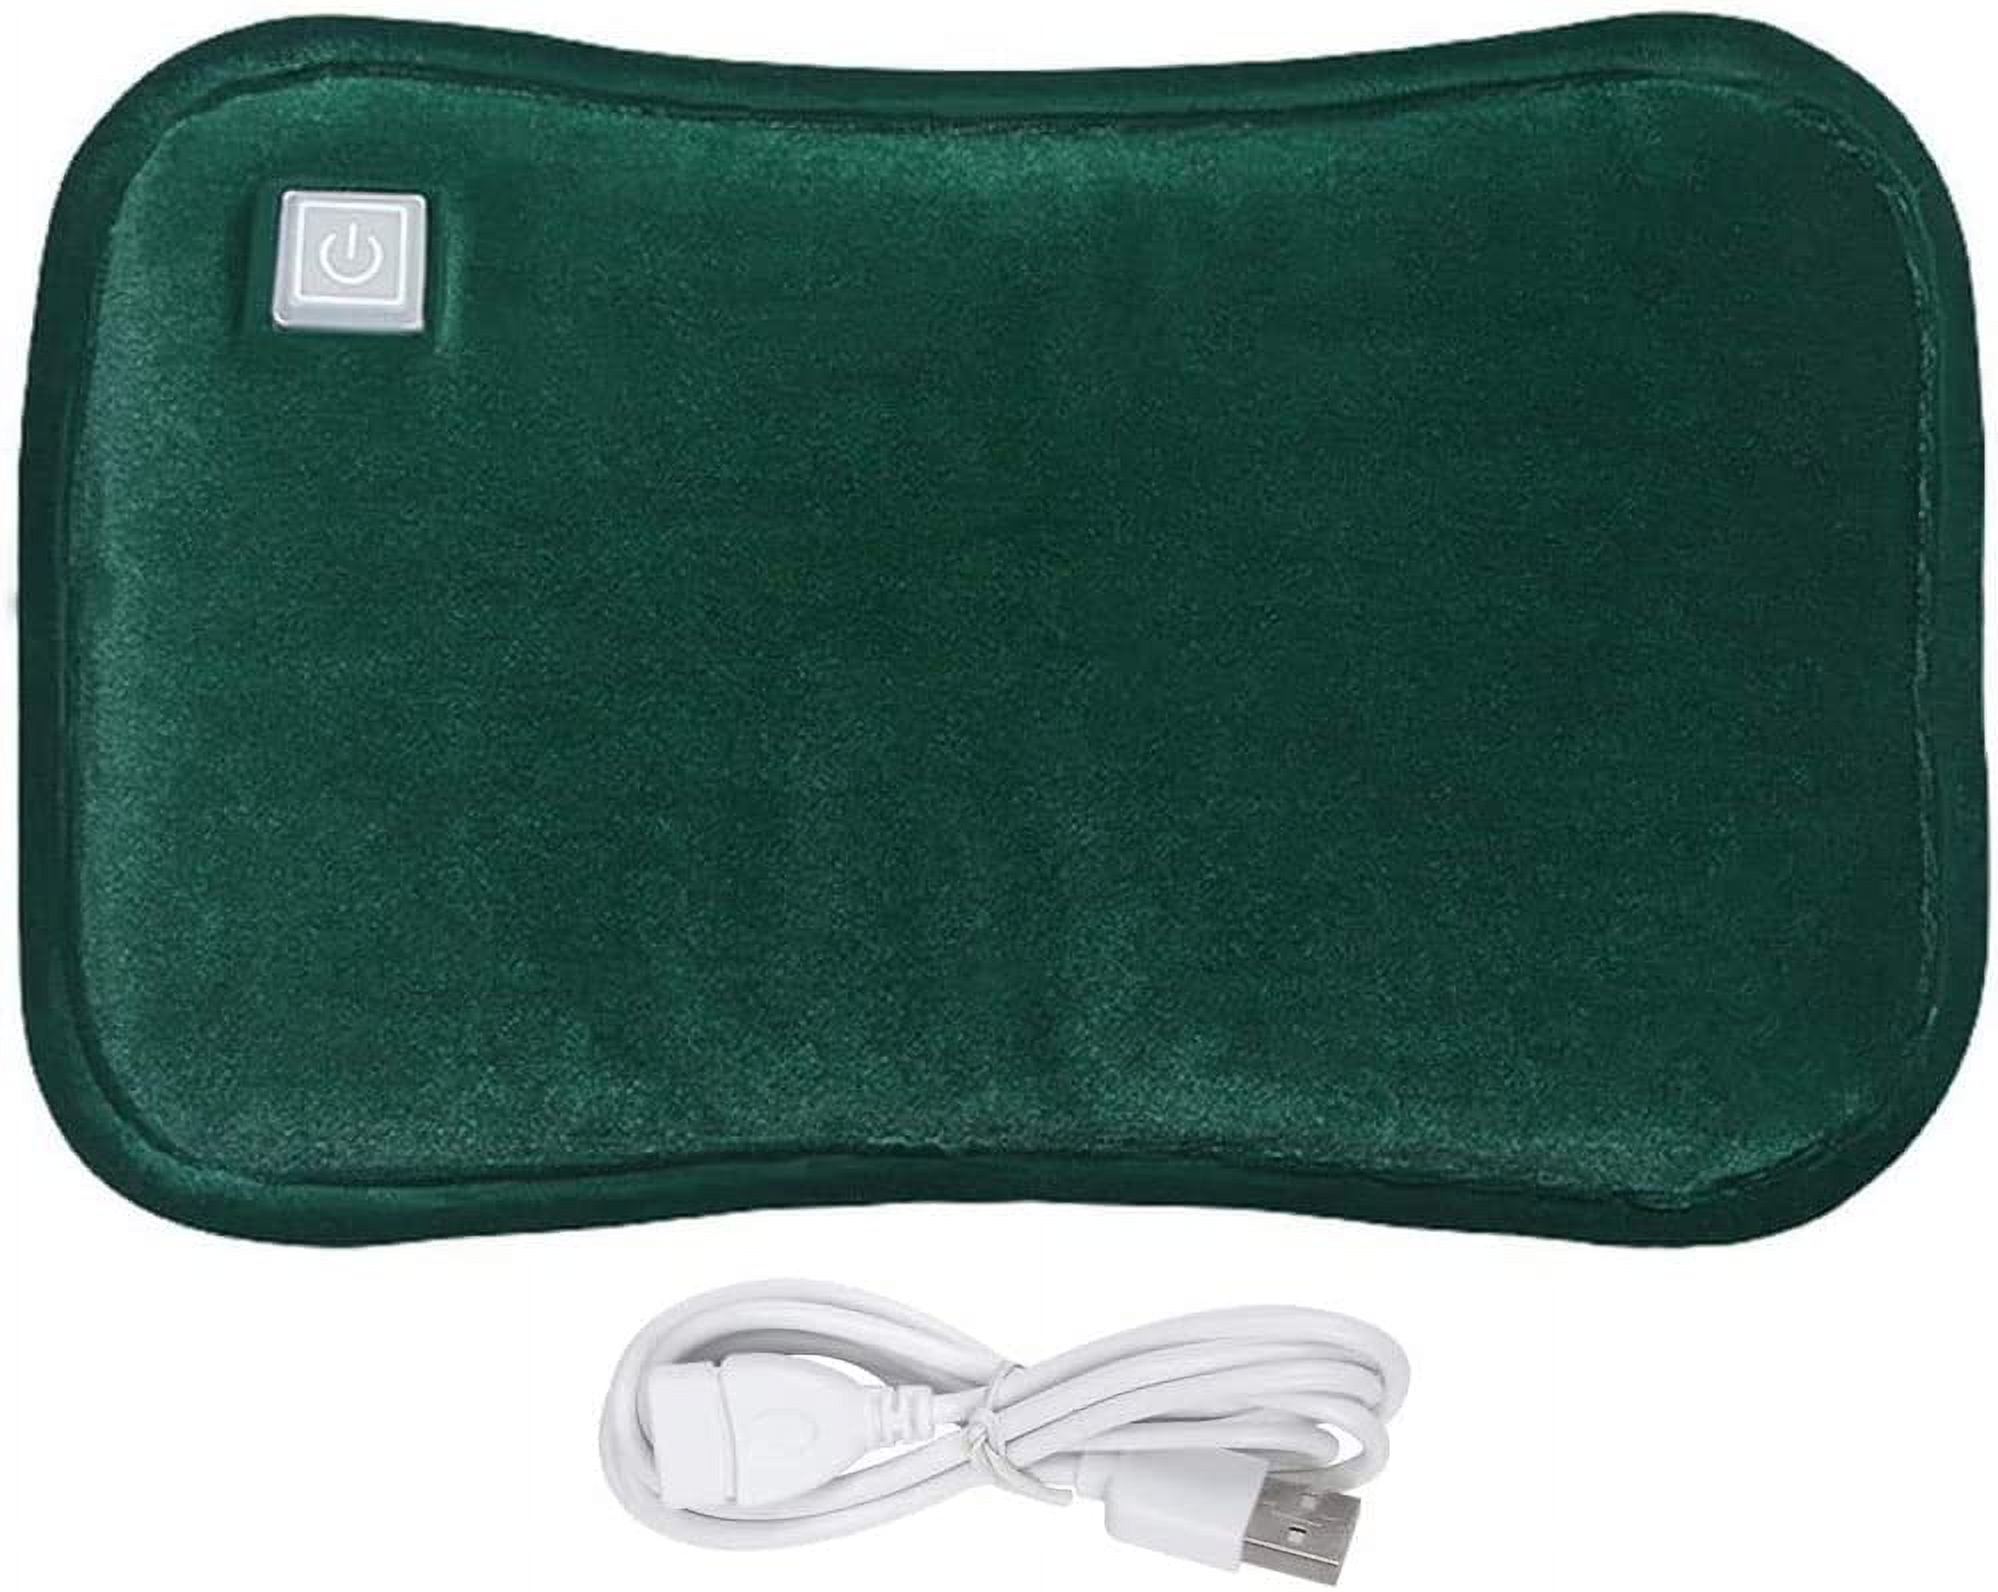 Hod Health & Home Silicone Heat Resistant Travel Bag Portable Heatproof Mat Green Pack of 1 